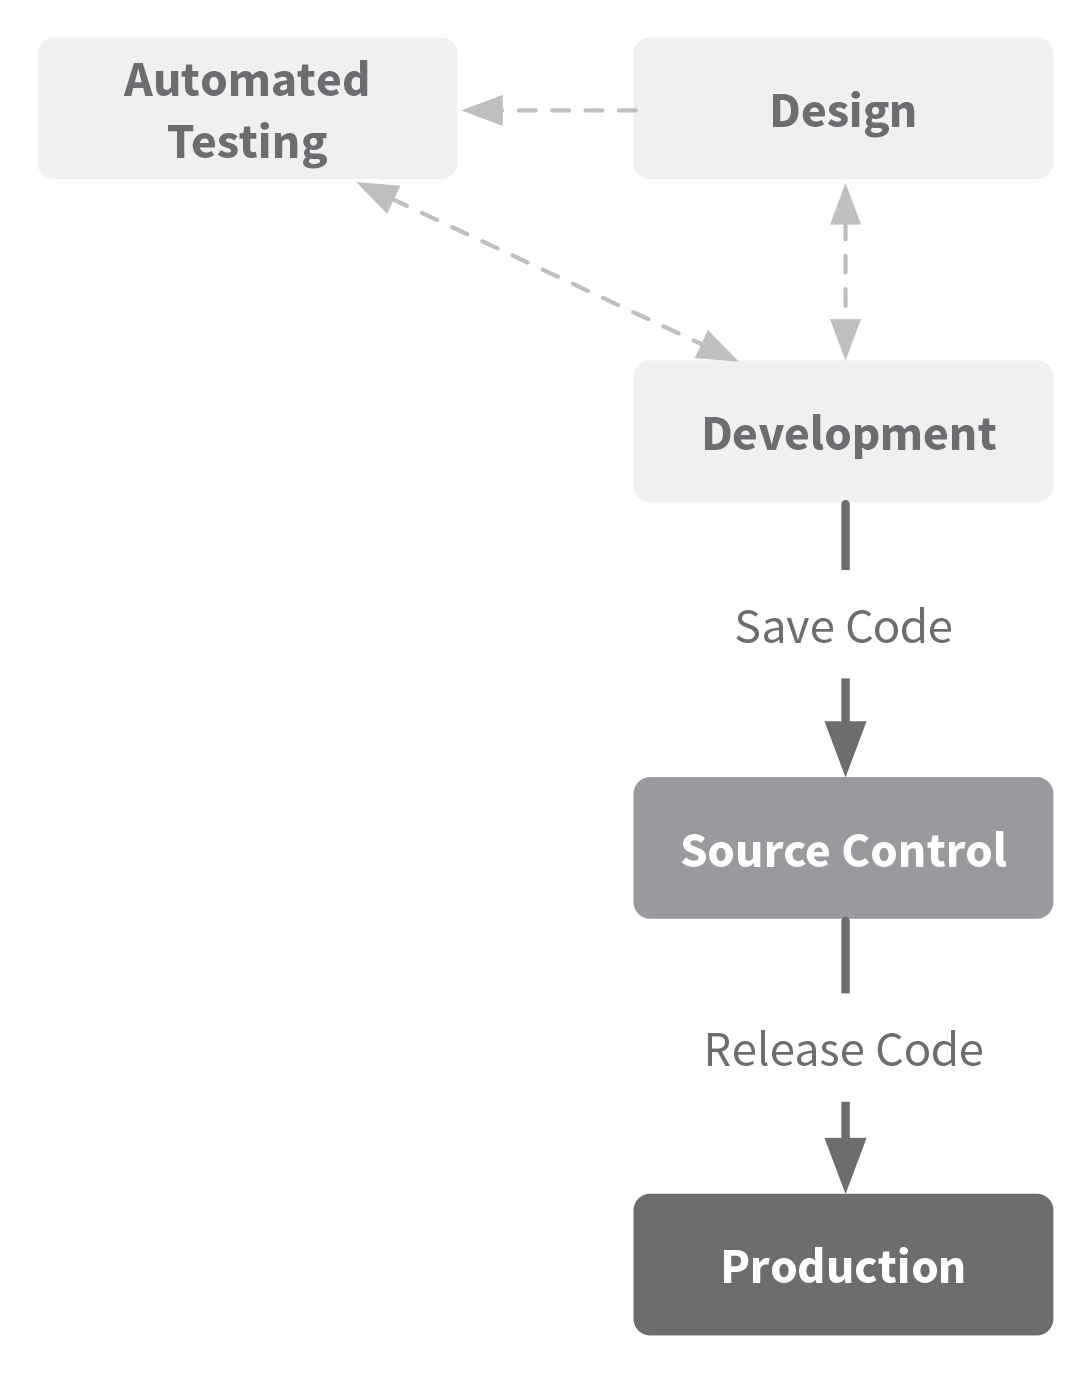 Expanding on the previous diagrams by addindg automated testing to the design and development process.